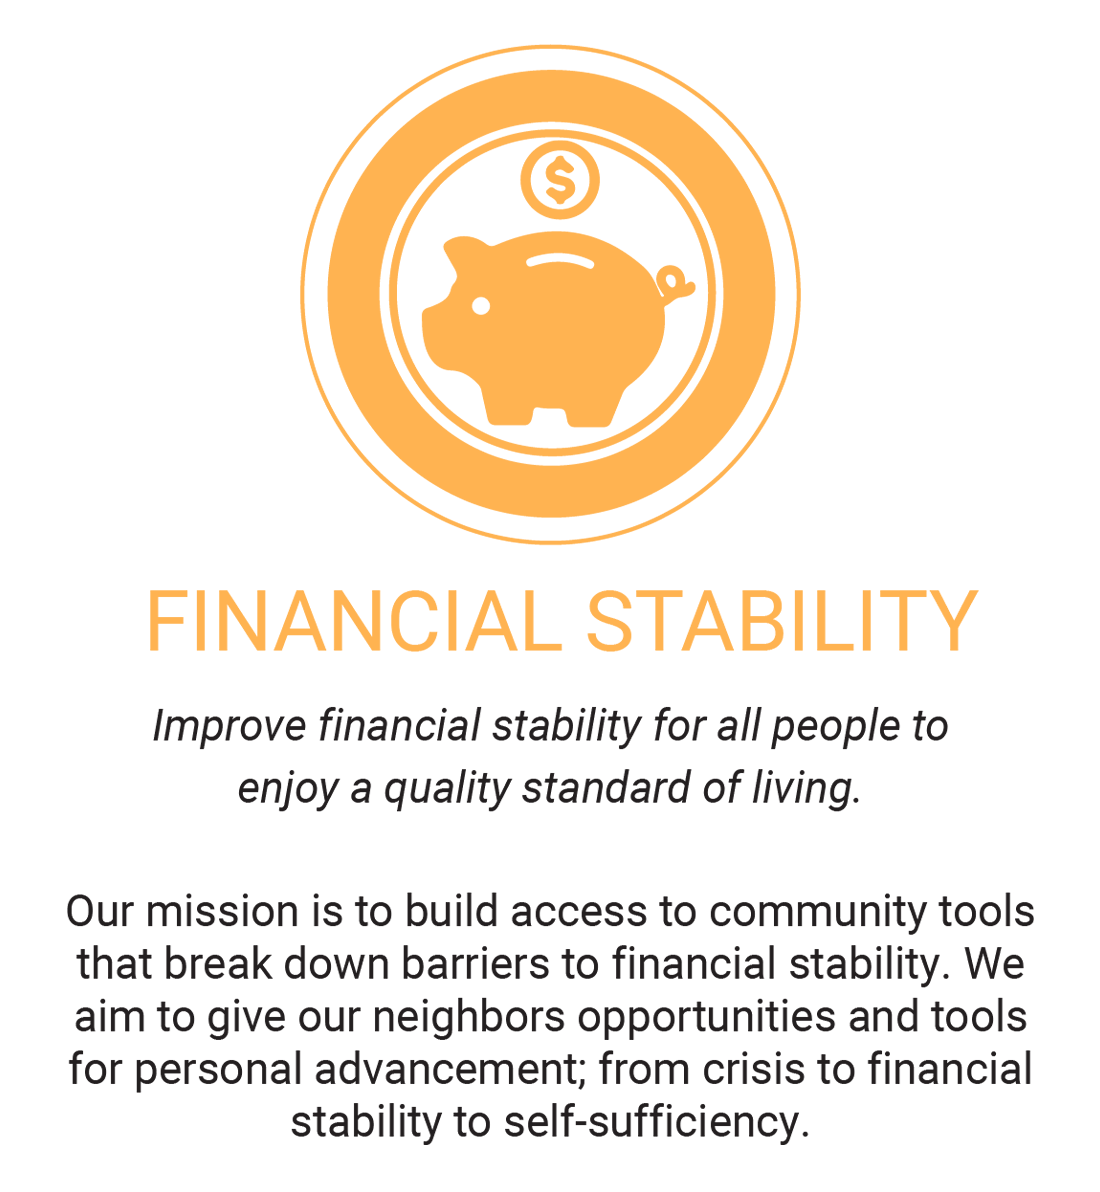 Yellow piggy bank icon representing financial stability inside of a larger yellow circle icon. Text reads Financial Stability - Improve financial stabiity for all people to enjoy a quality standard of living. Our mission is to build access to community tools that break down barriers to financial stability. We aim to give our neighbors opportunities and tools for personal advancement; from crisis to financial stability to self-sufficiency.